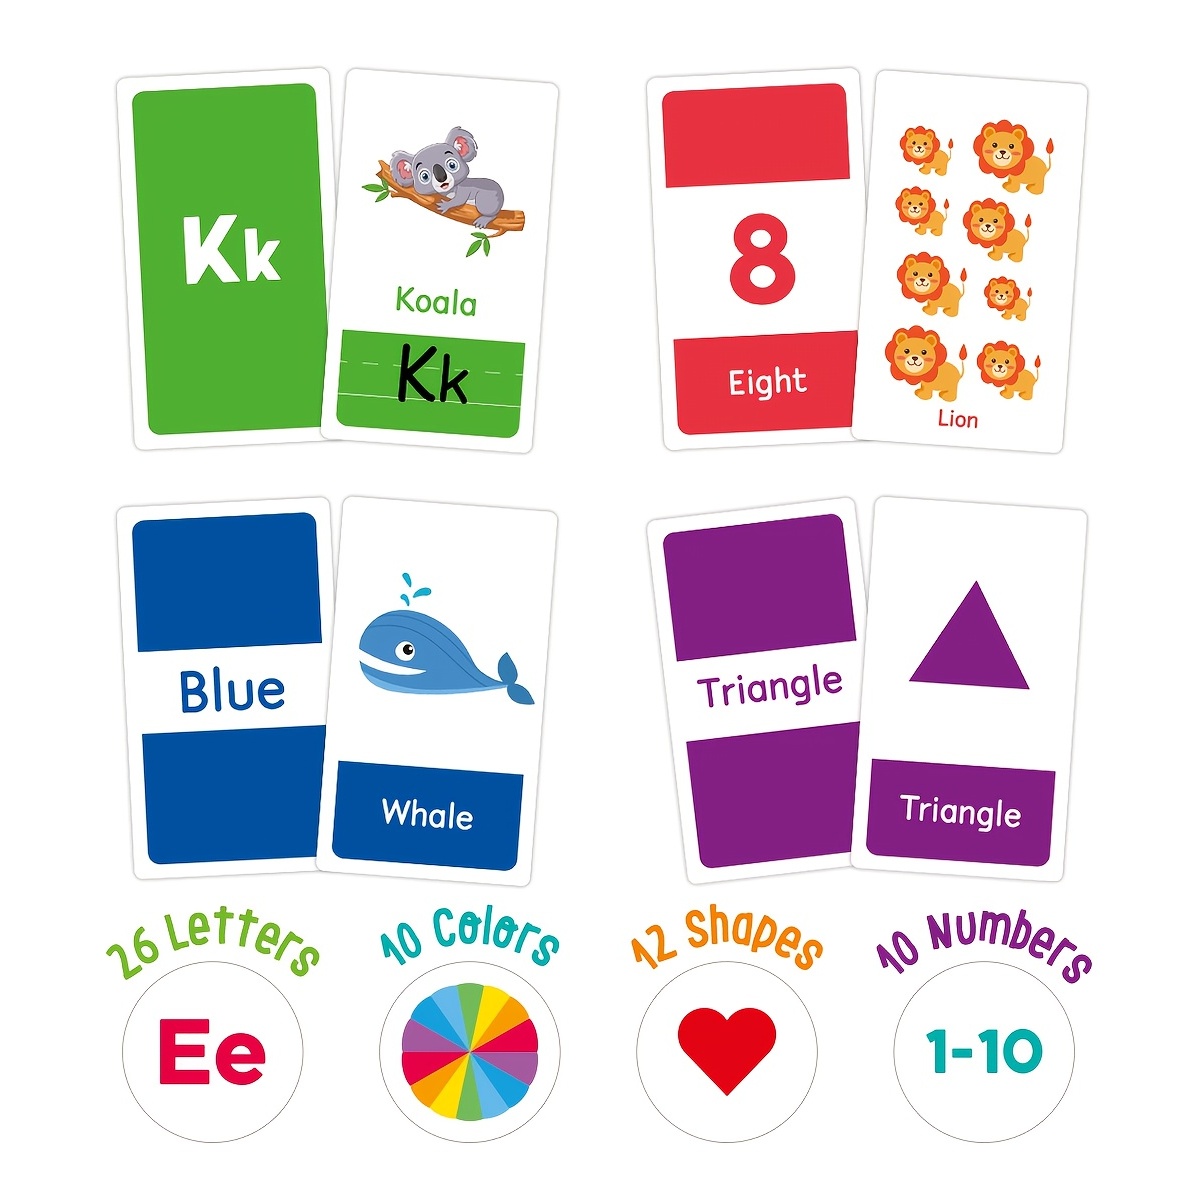 Things that Start with W Cards - Alphabet Printables